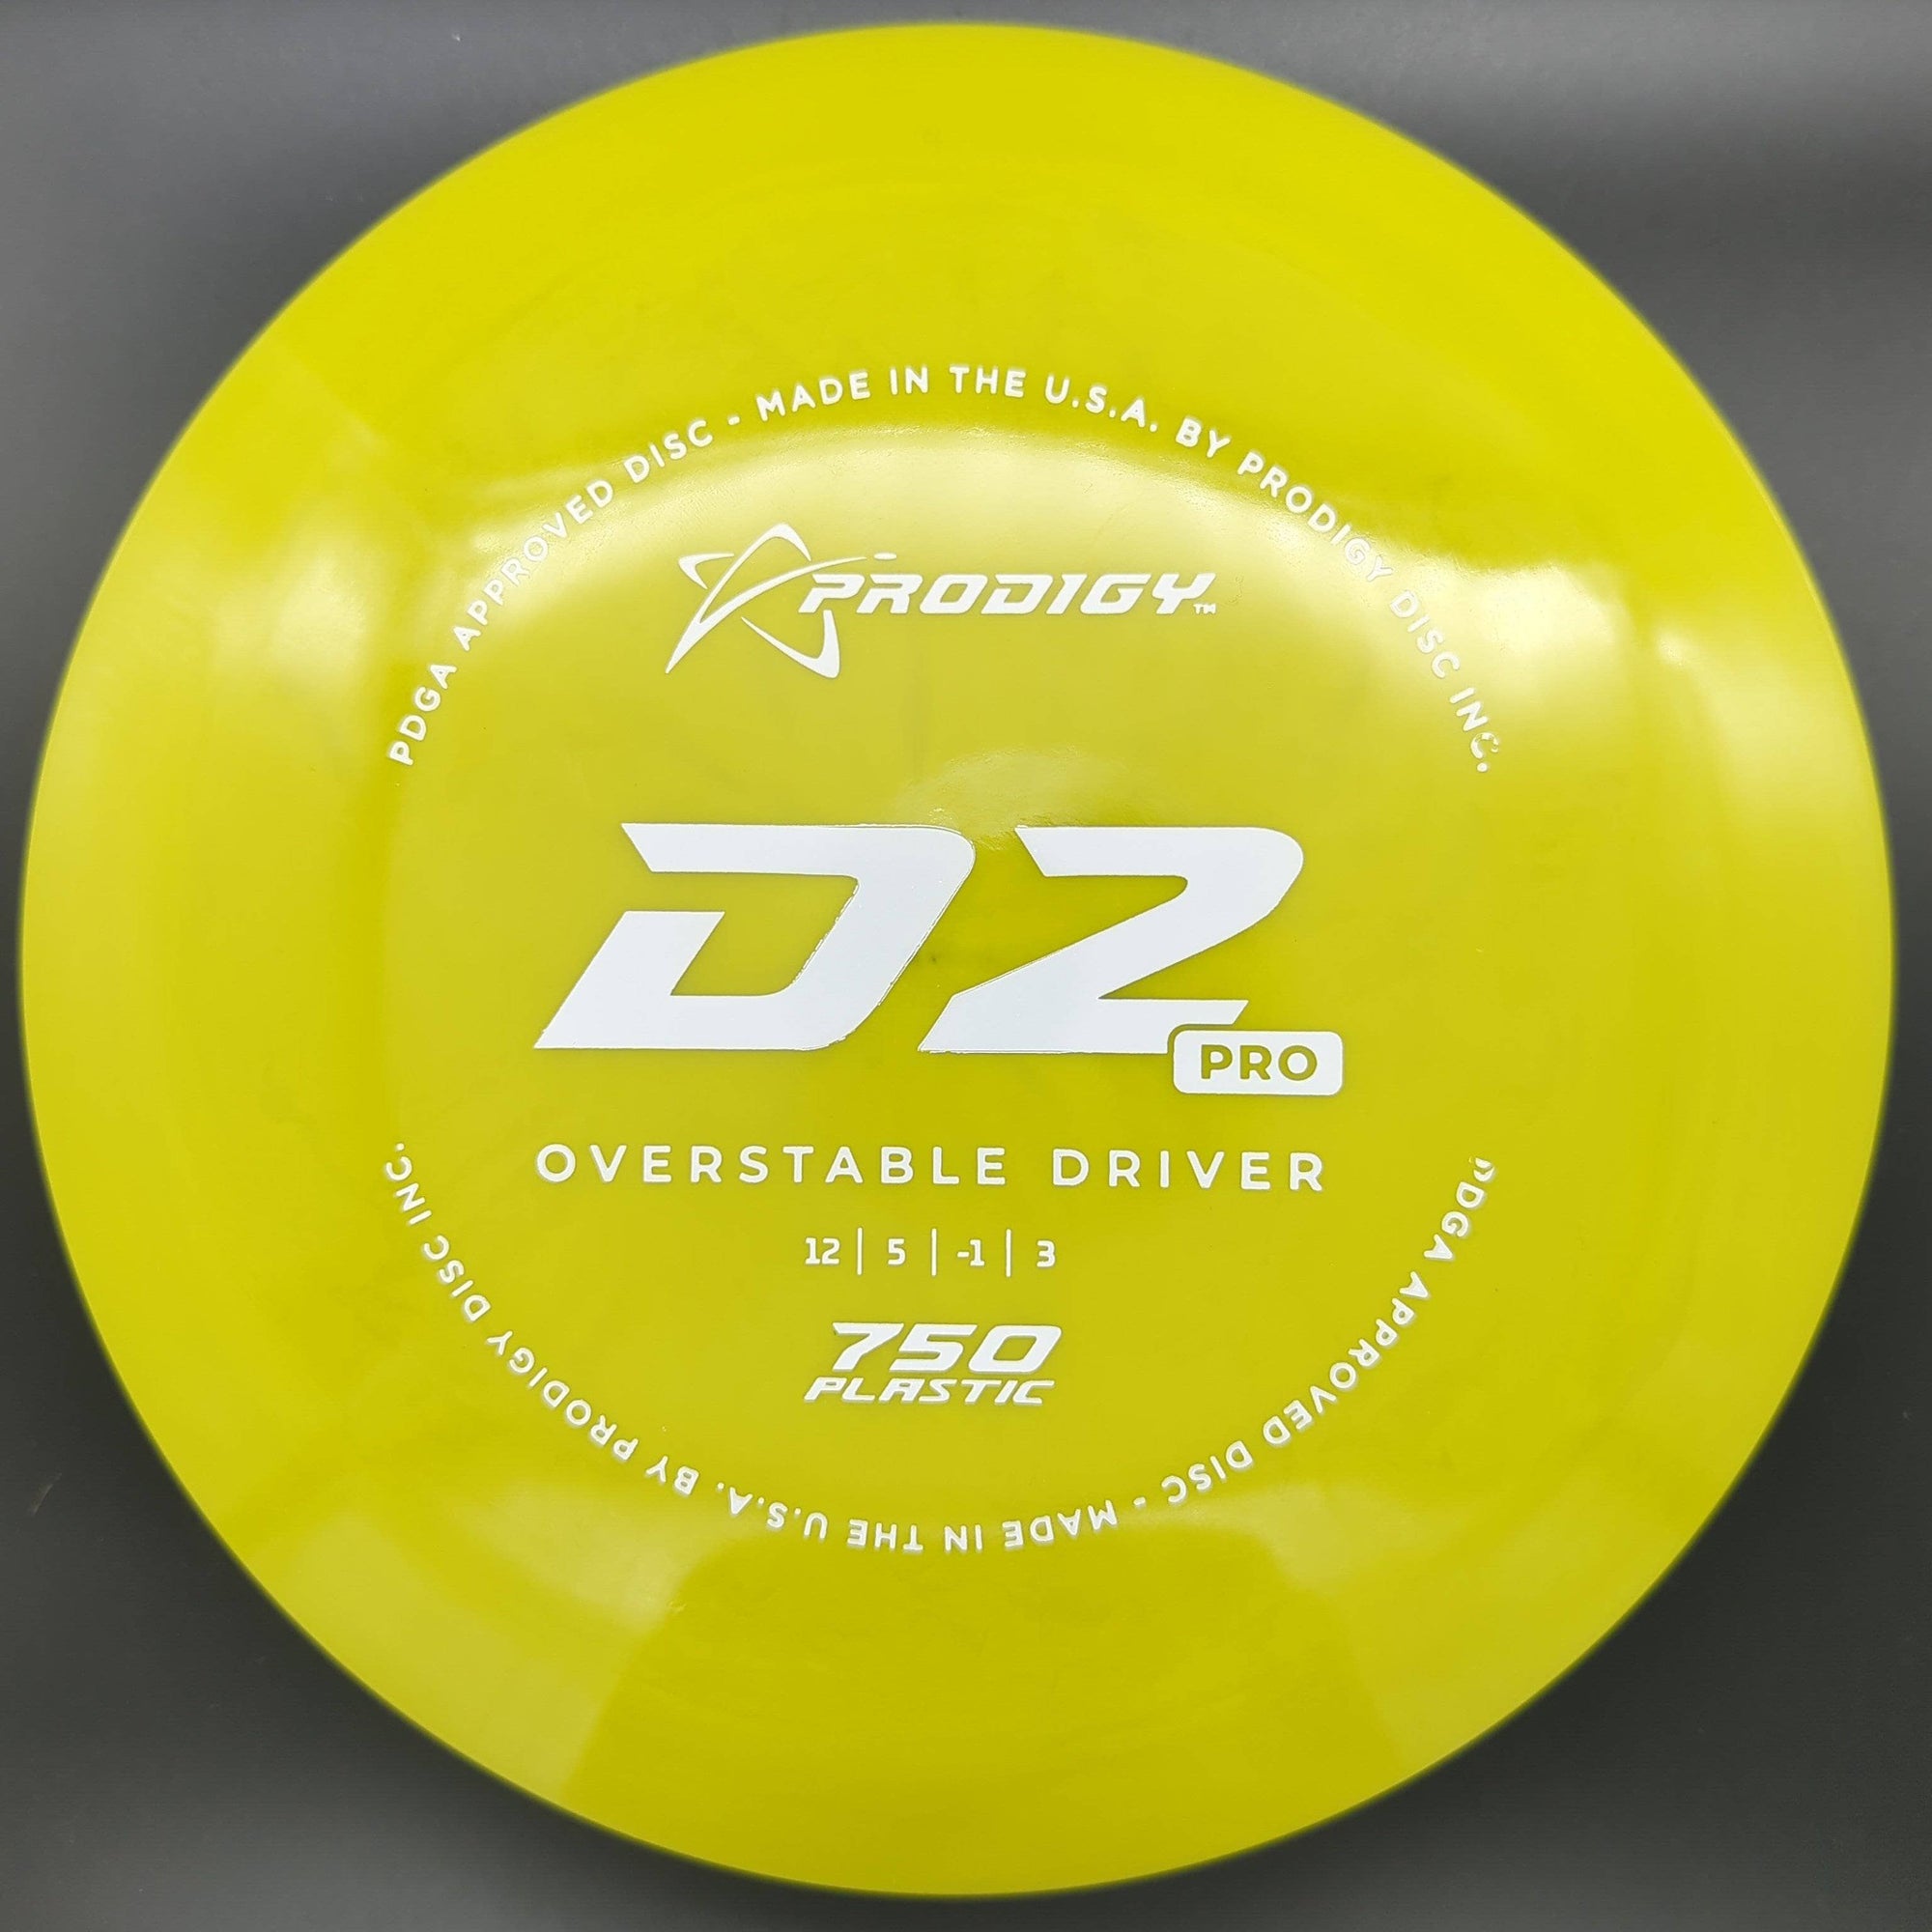 Prodigy Distance Driver Yellow White Stamp 174g 3 D2 Pro, 750 Plastic